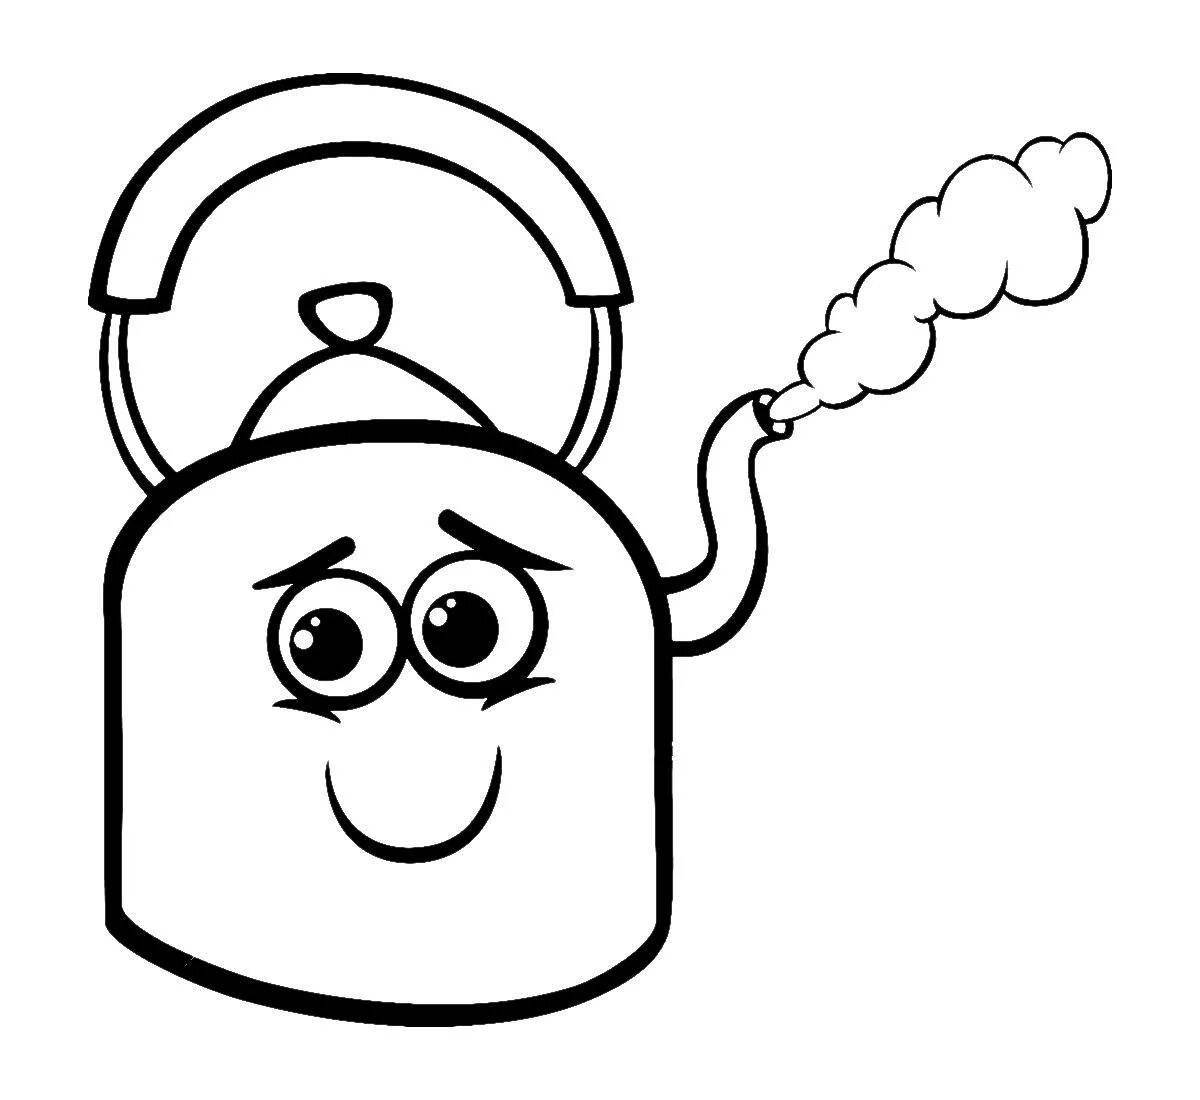 Glorious teapot coloring pages for kids